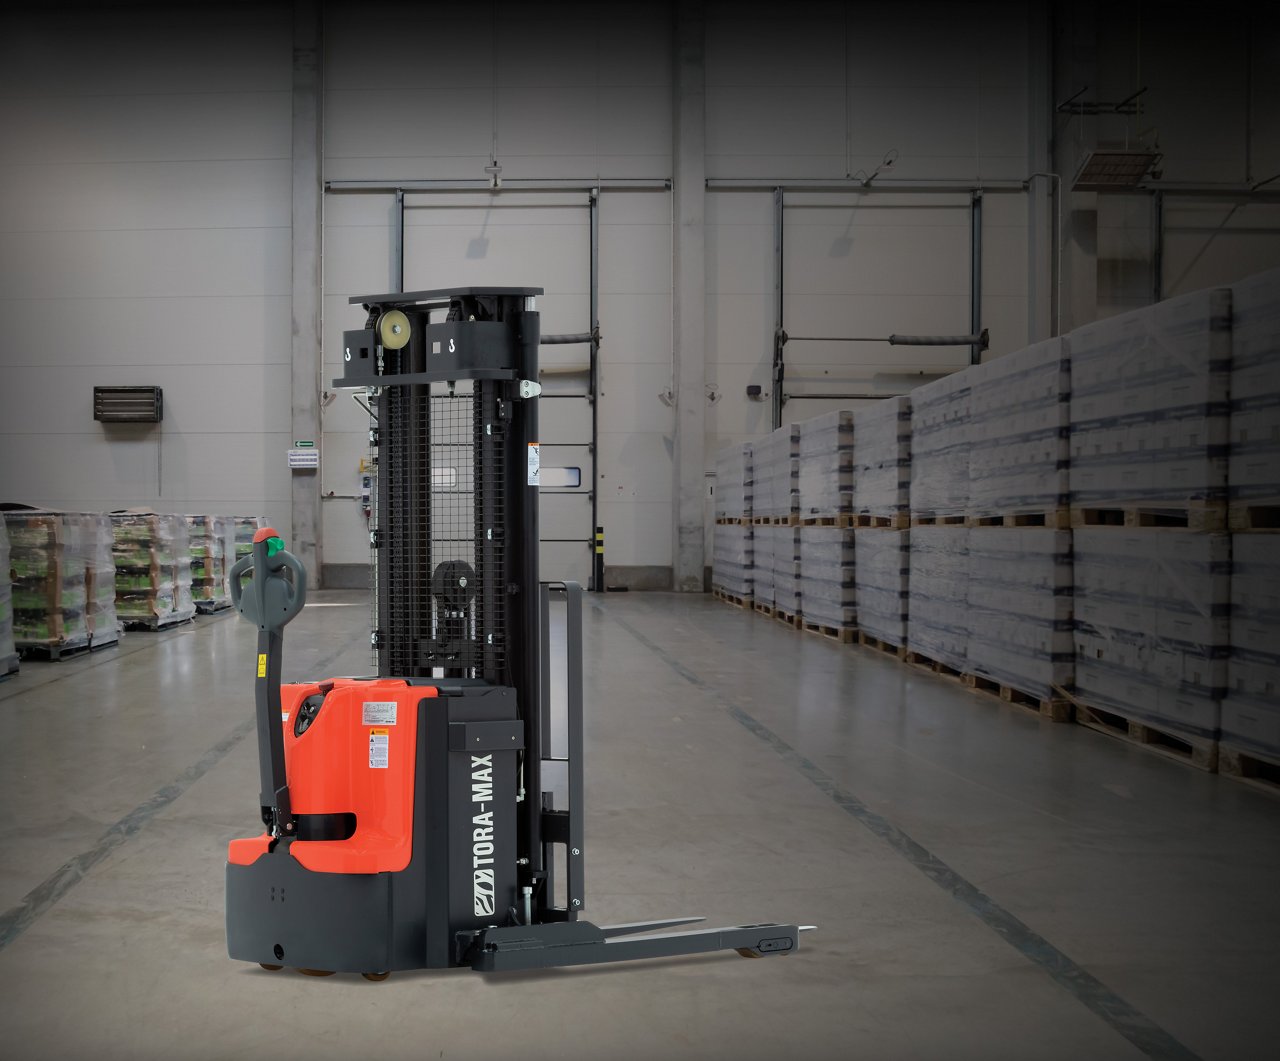 orange forklift stacker used in warehouse environment to load and unload products from point A to point B